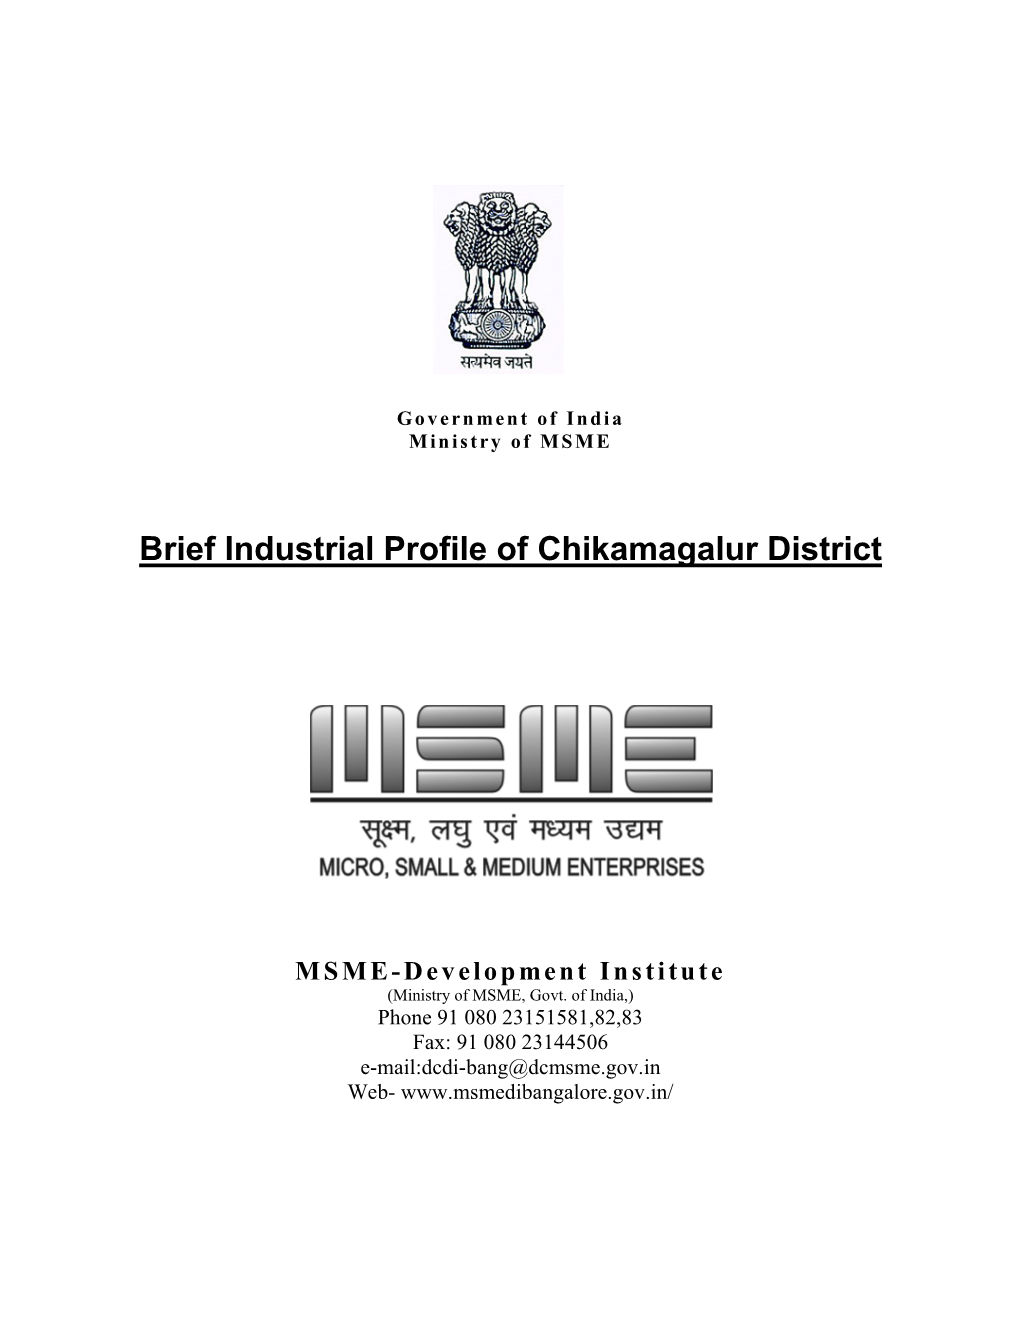 Brief Industrial Profile of Chikamagalur District